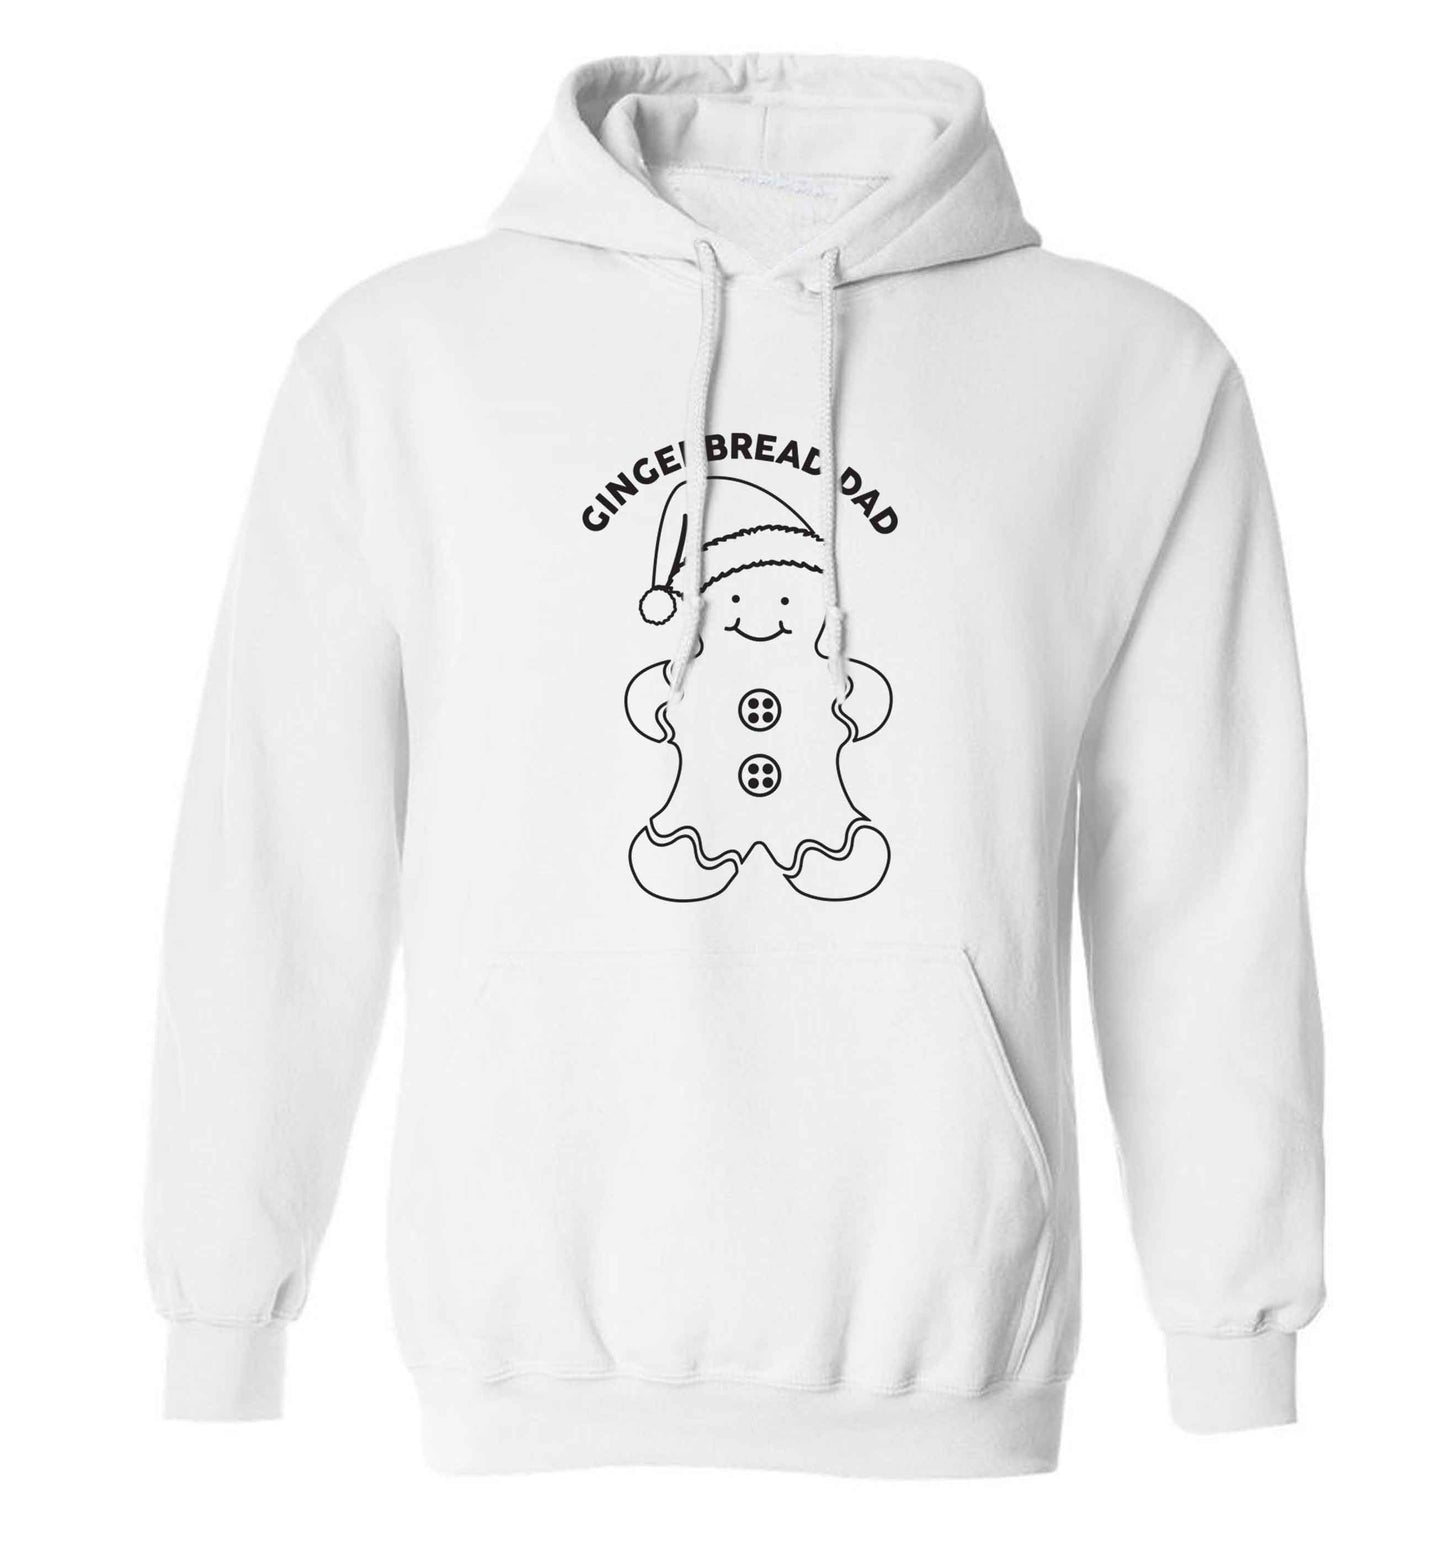 Merry Christmas adults unisex white hoodie 2XL